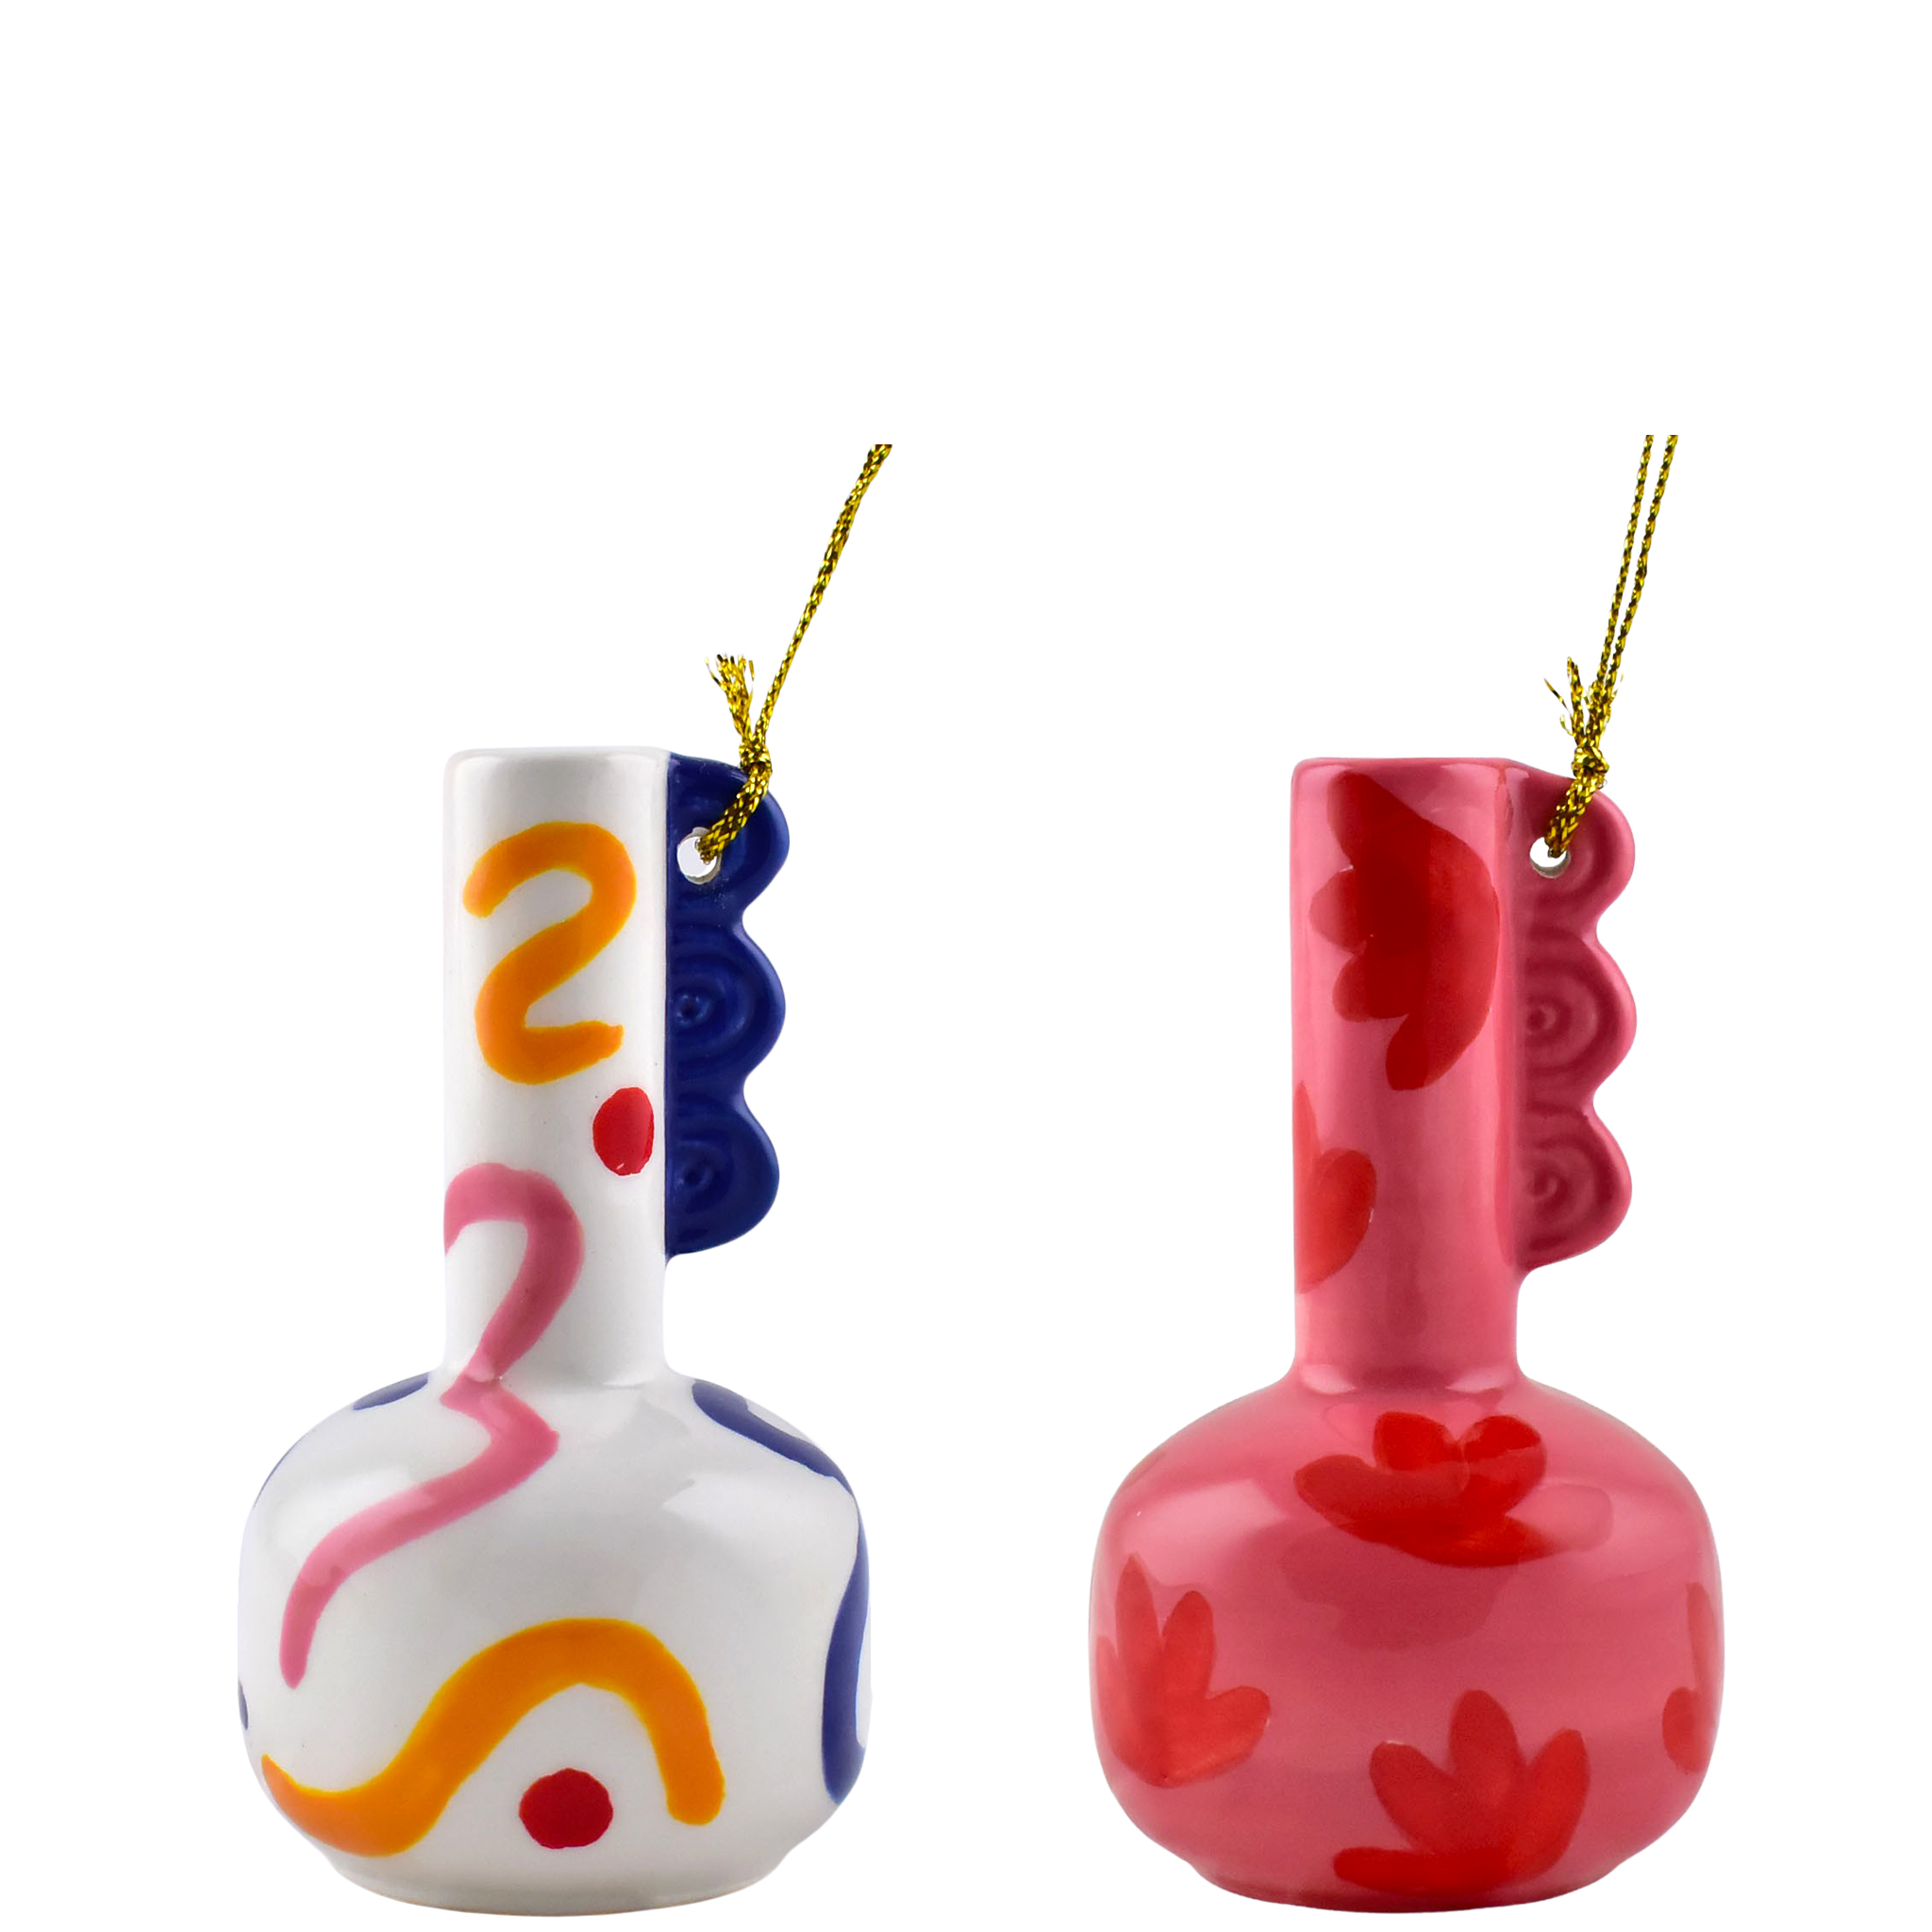 Lucas Vase Christmas Ornaments - 2 Assorted Gift